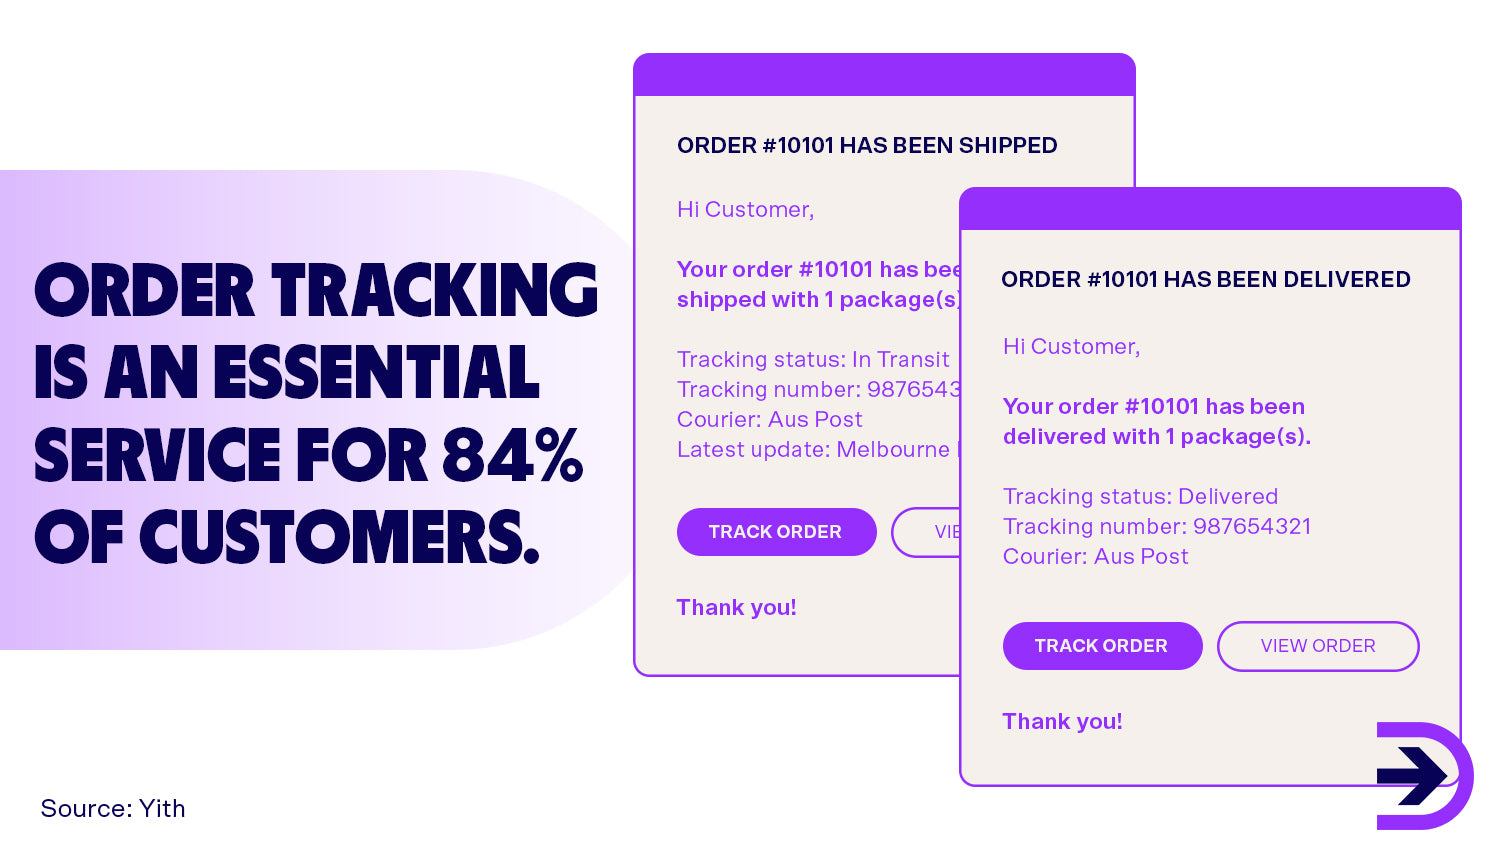 Order tracking not only allows for a positive checkout process, but also reduces the amount of customer enquiries about the status of packages.